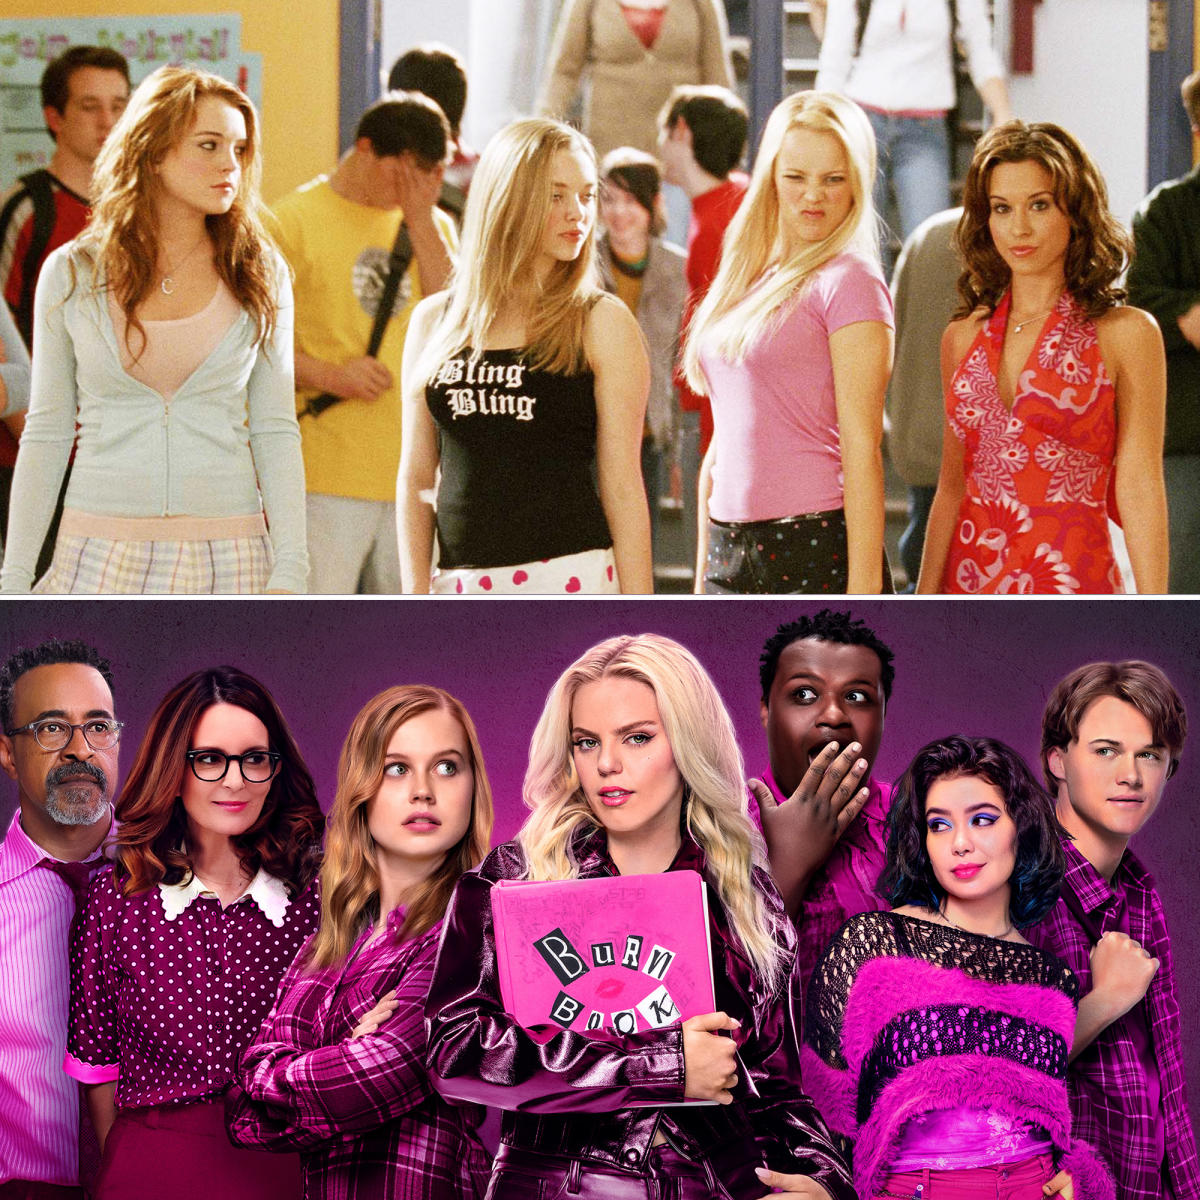 Mean Girls' review: A grool musical update of the teen classic